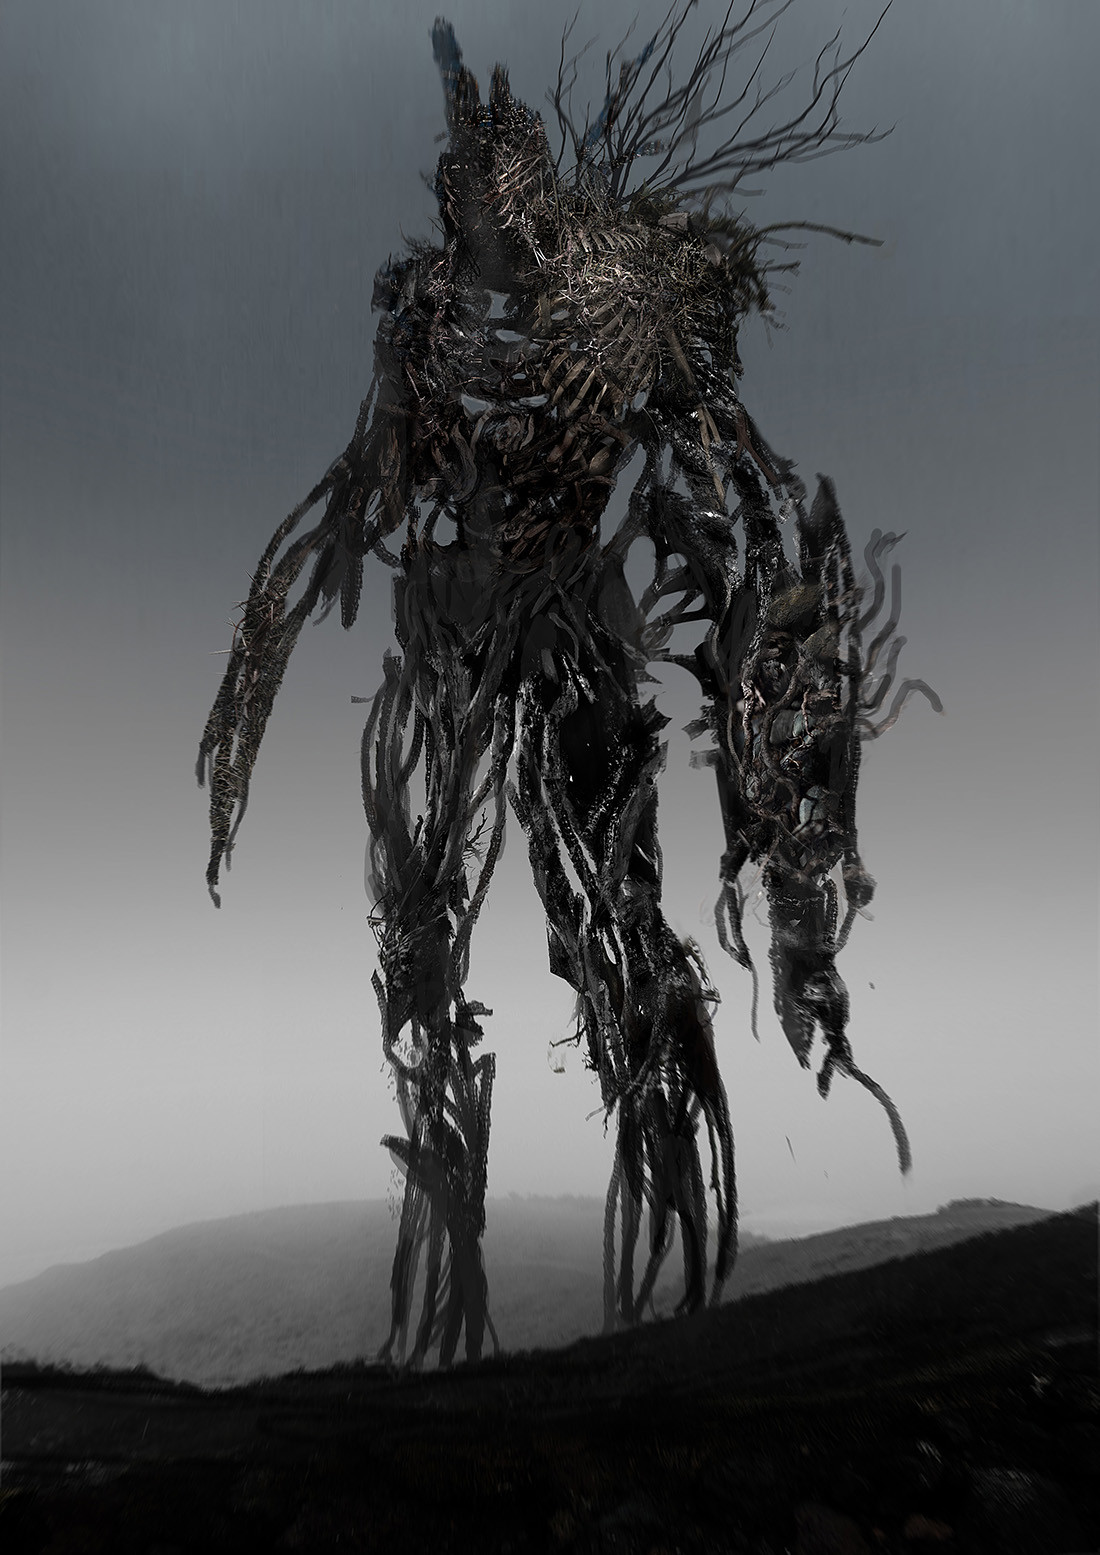 early sentinel concept done for The last Witch Hunter